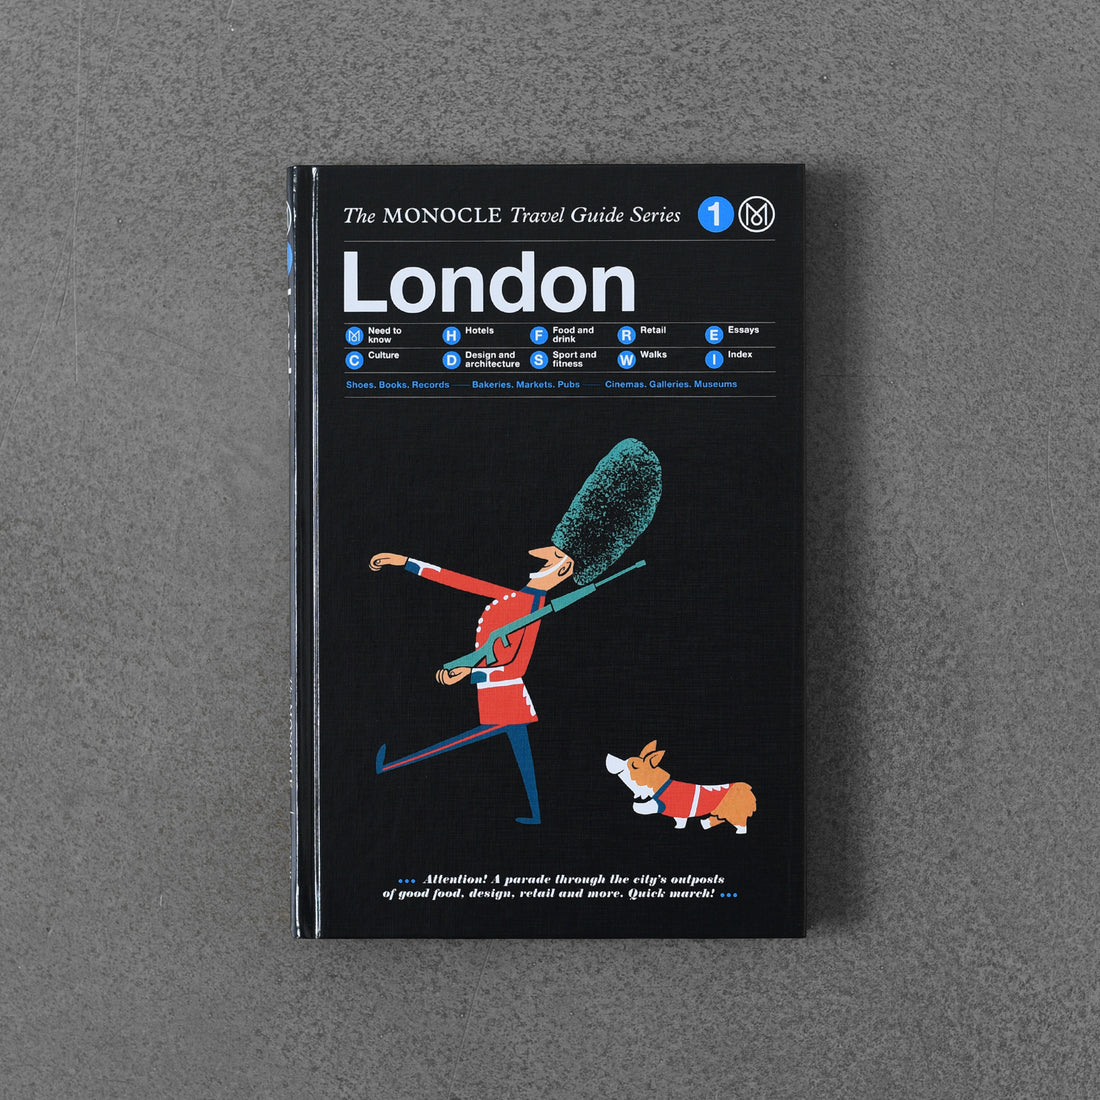 The Monocle Travel Guide Series London